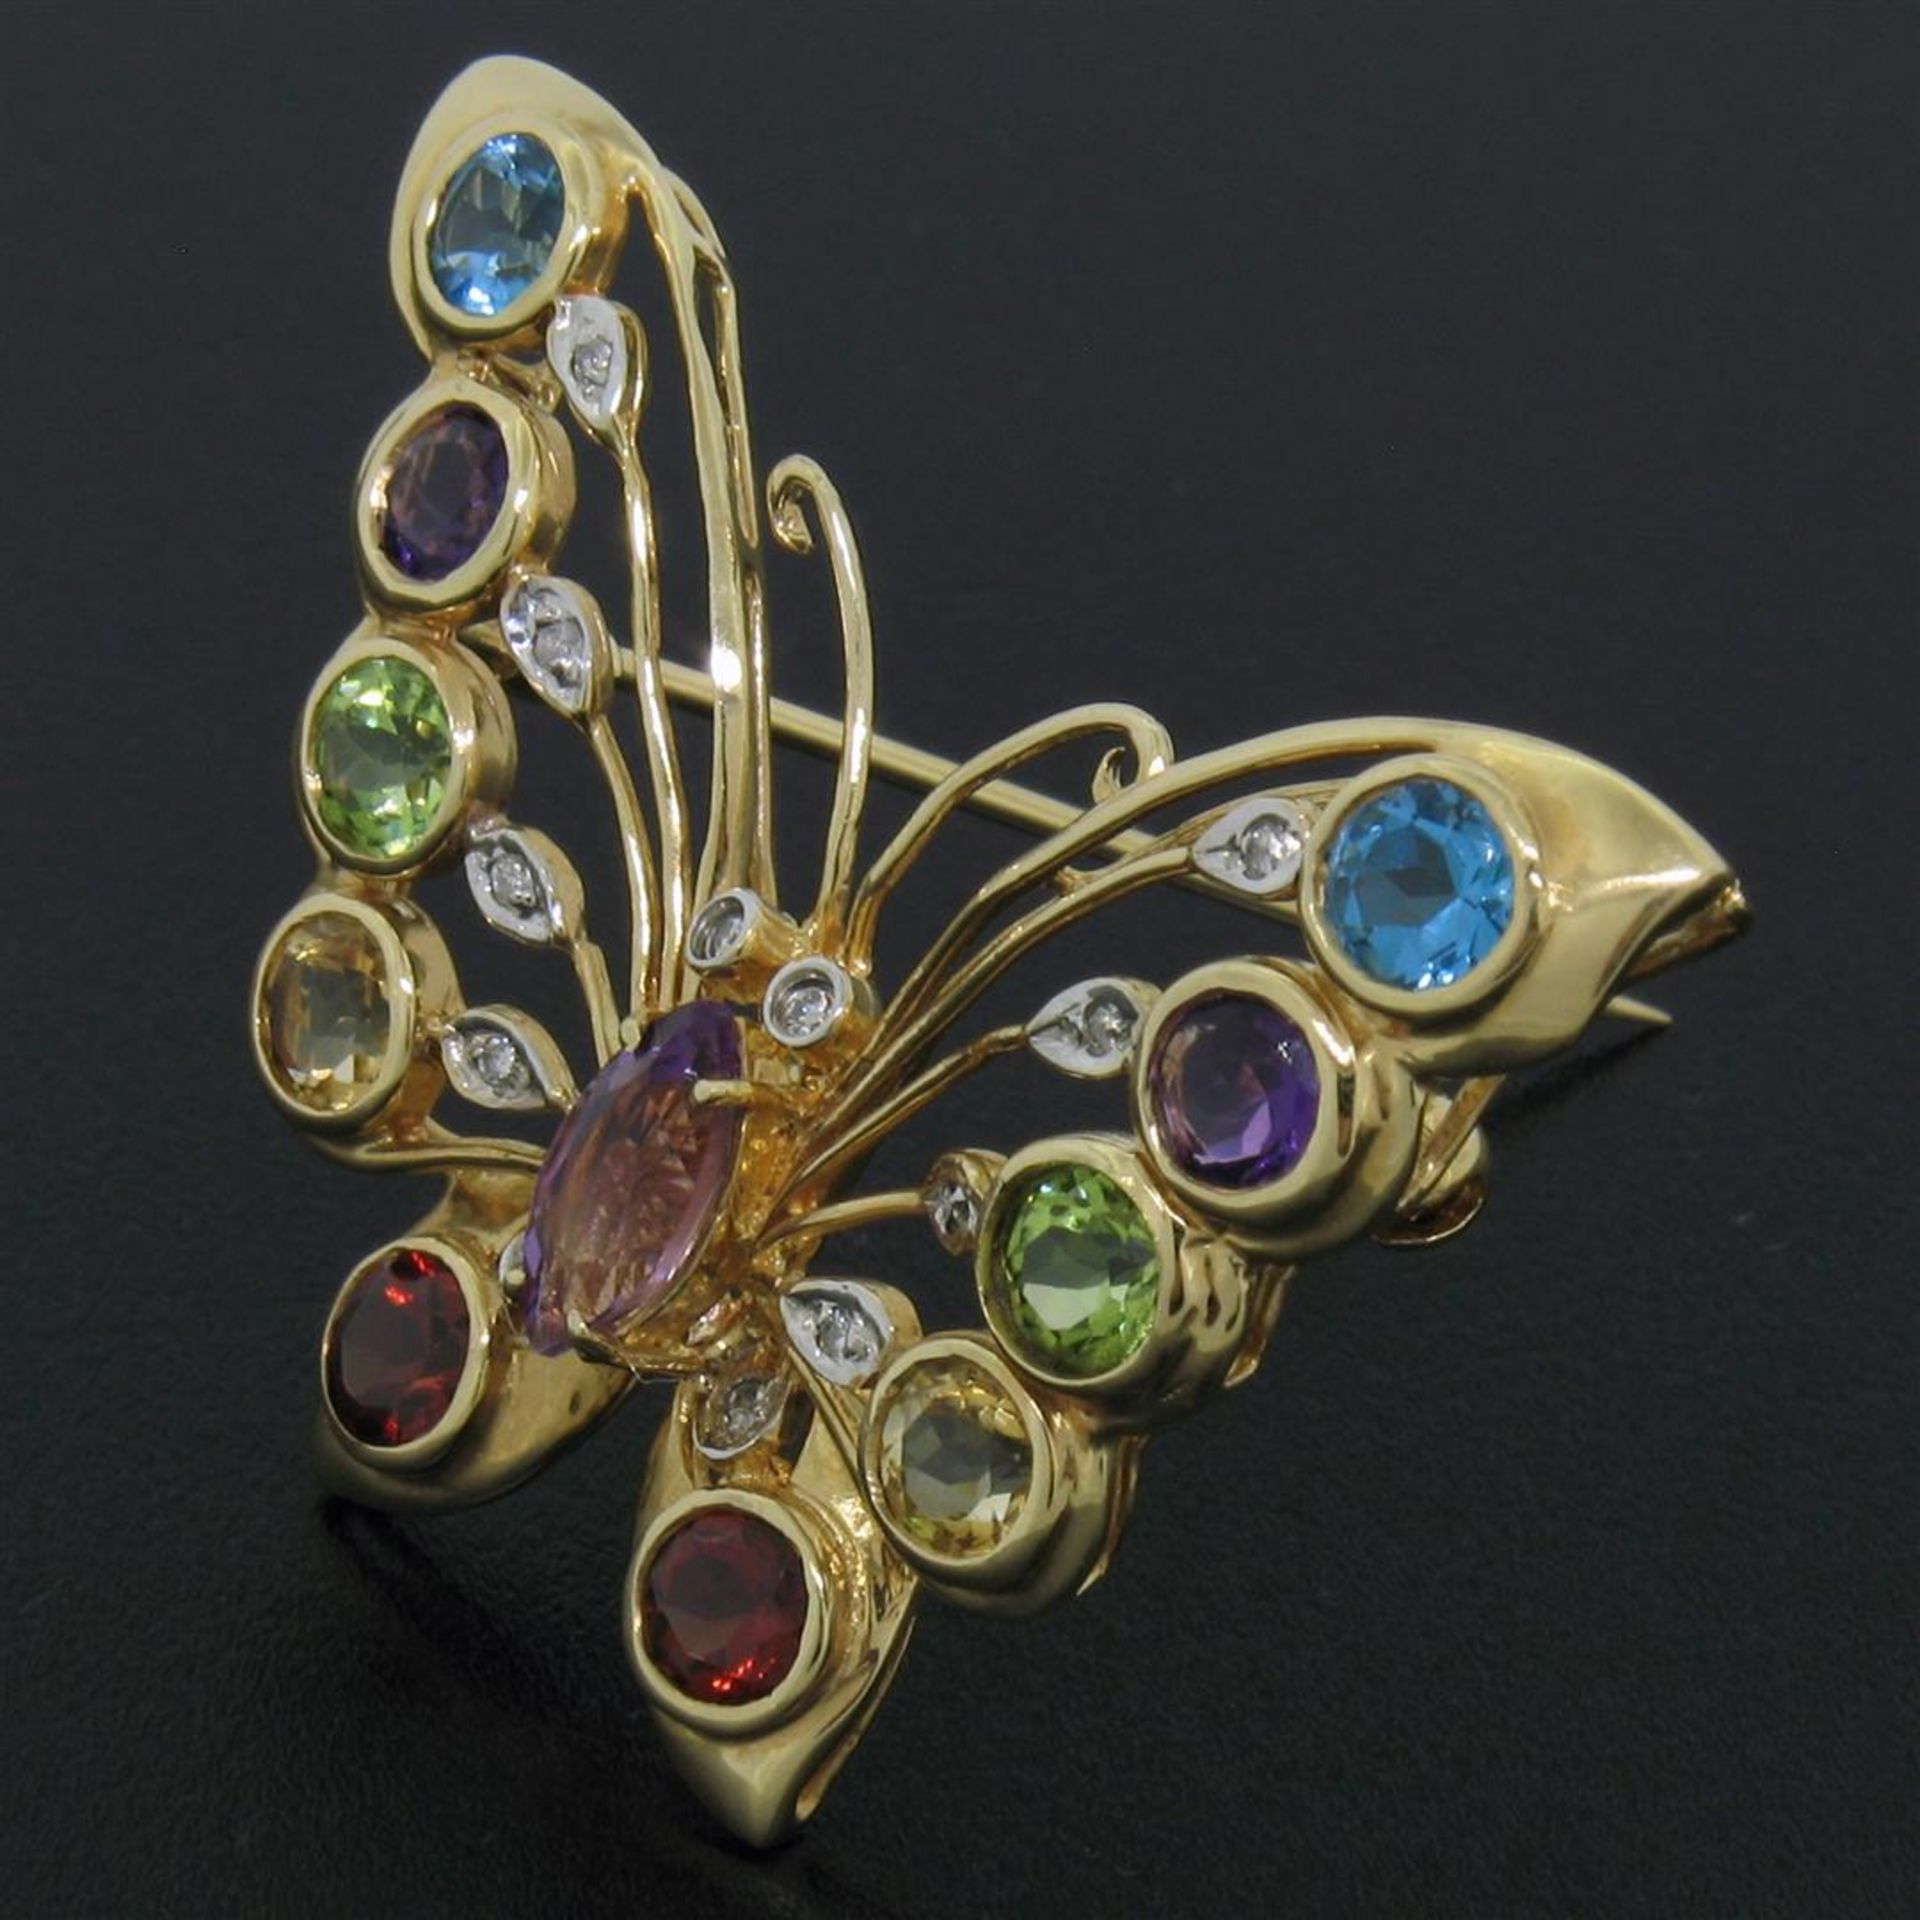 14k Yellow Gold 3.12ct Multi Colored Natural Gemstone & Diamond Butterfly Brooch - Image 2 of 7